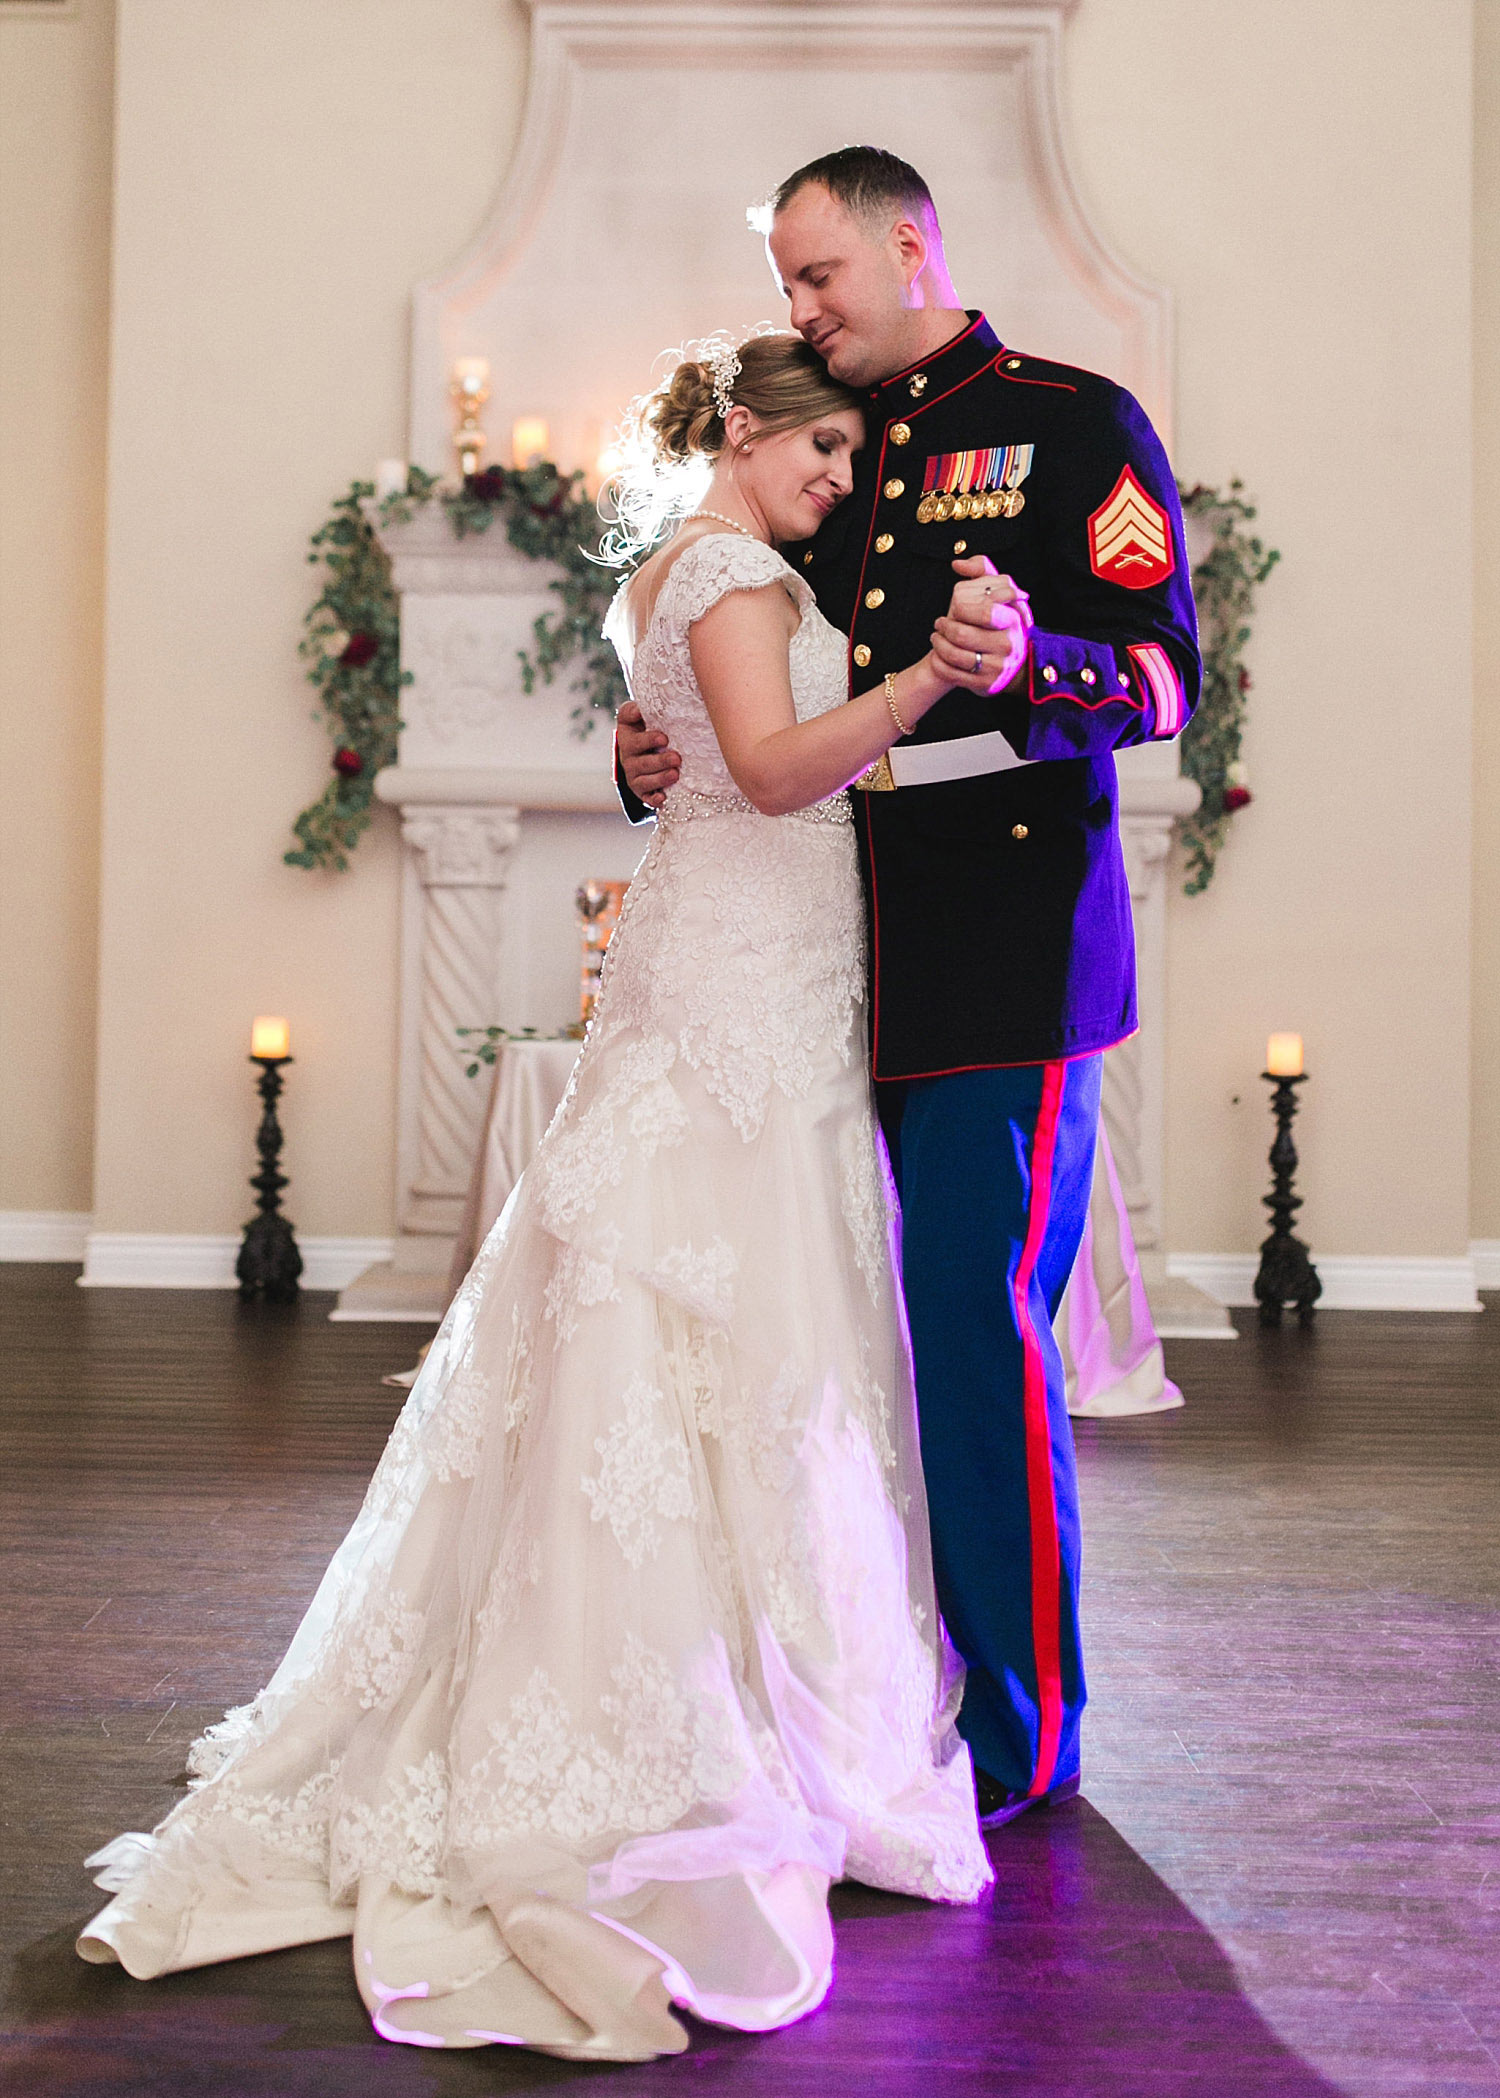 Castle at Rockwall wedding bride and marine groom dancing in front of fireplace